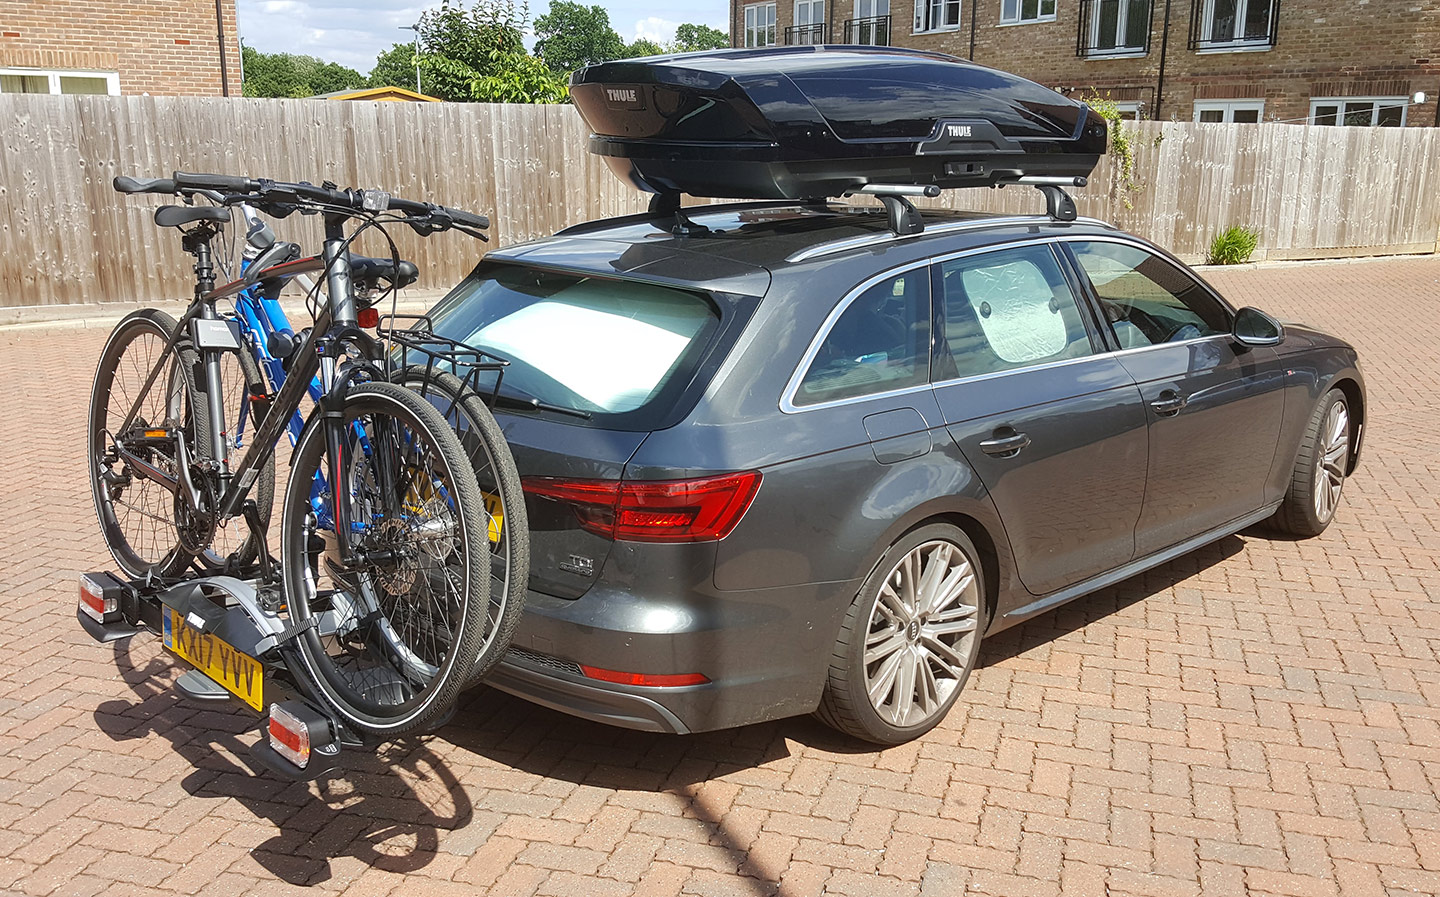 Audi A4 Avant quattro long-term review: summer holiday practicality, space, driving impressions